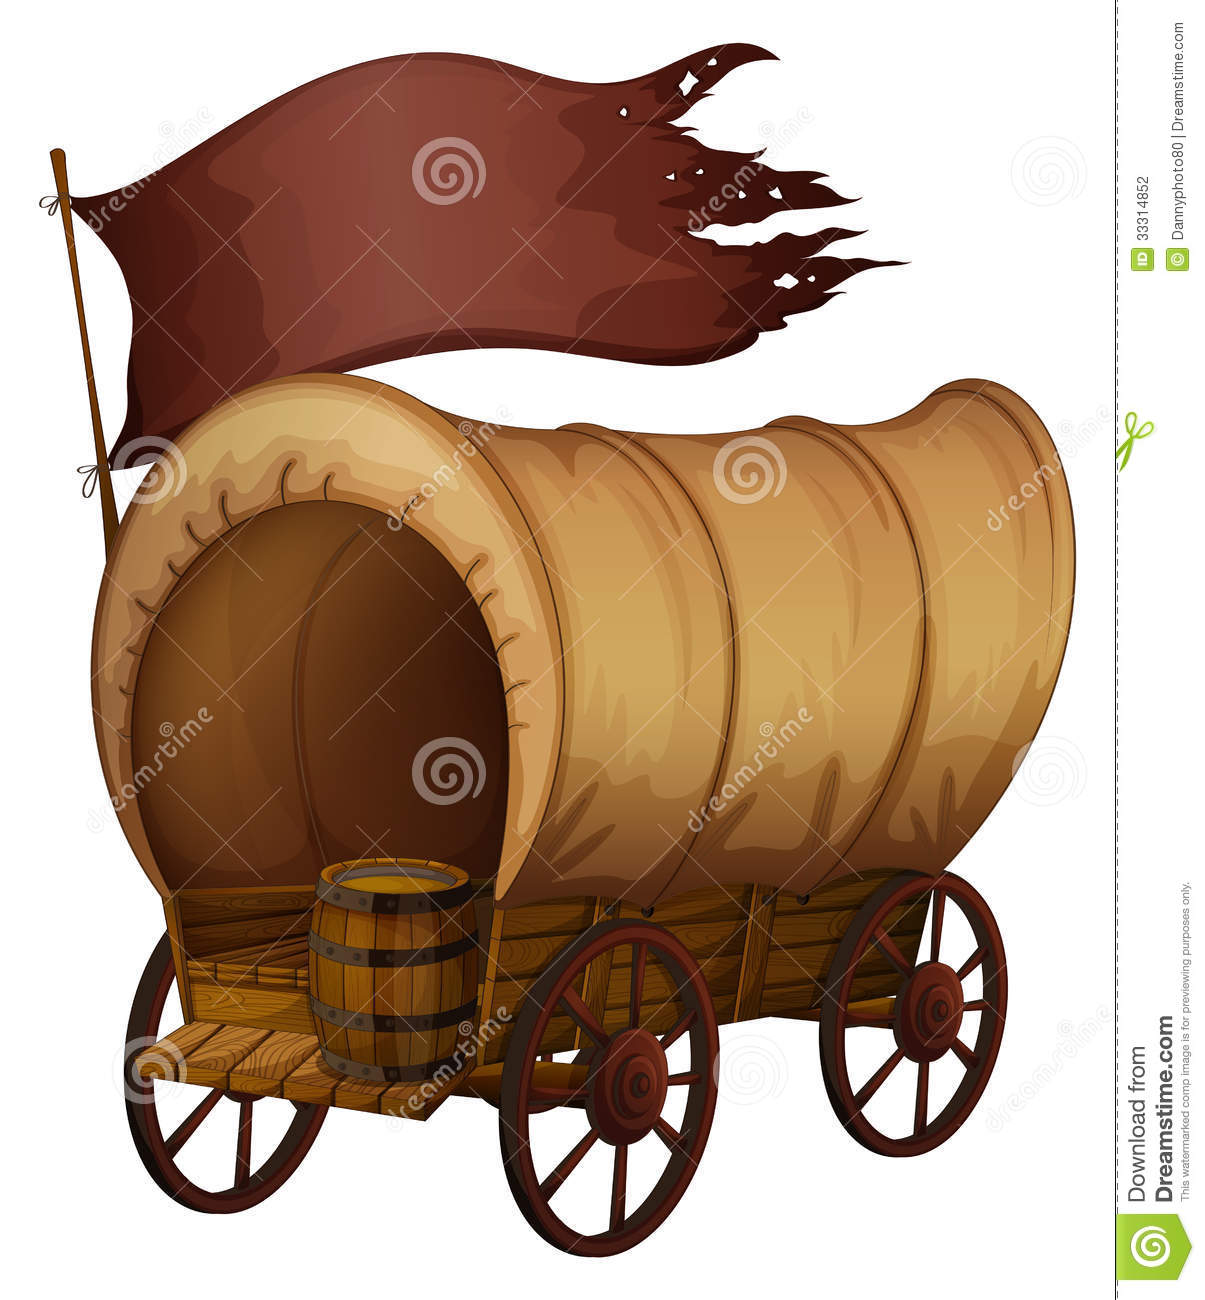 Illustration Of A Wooden Carriage On A White Background